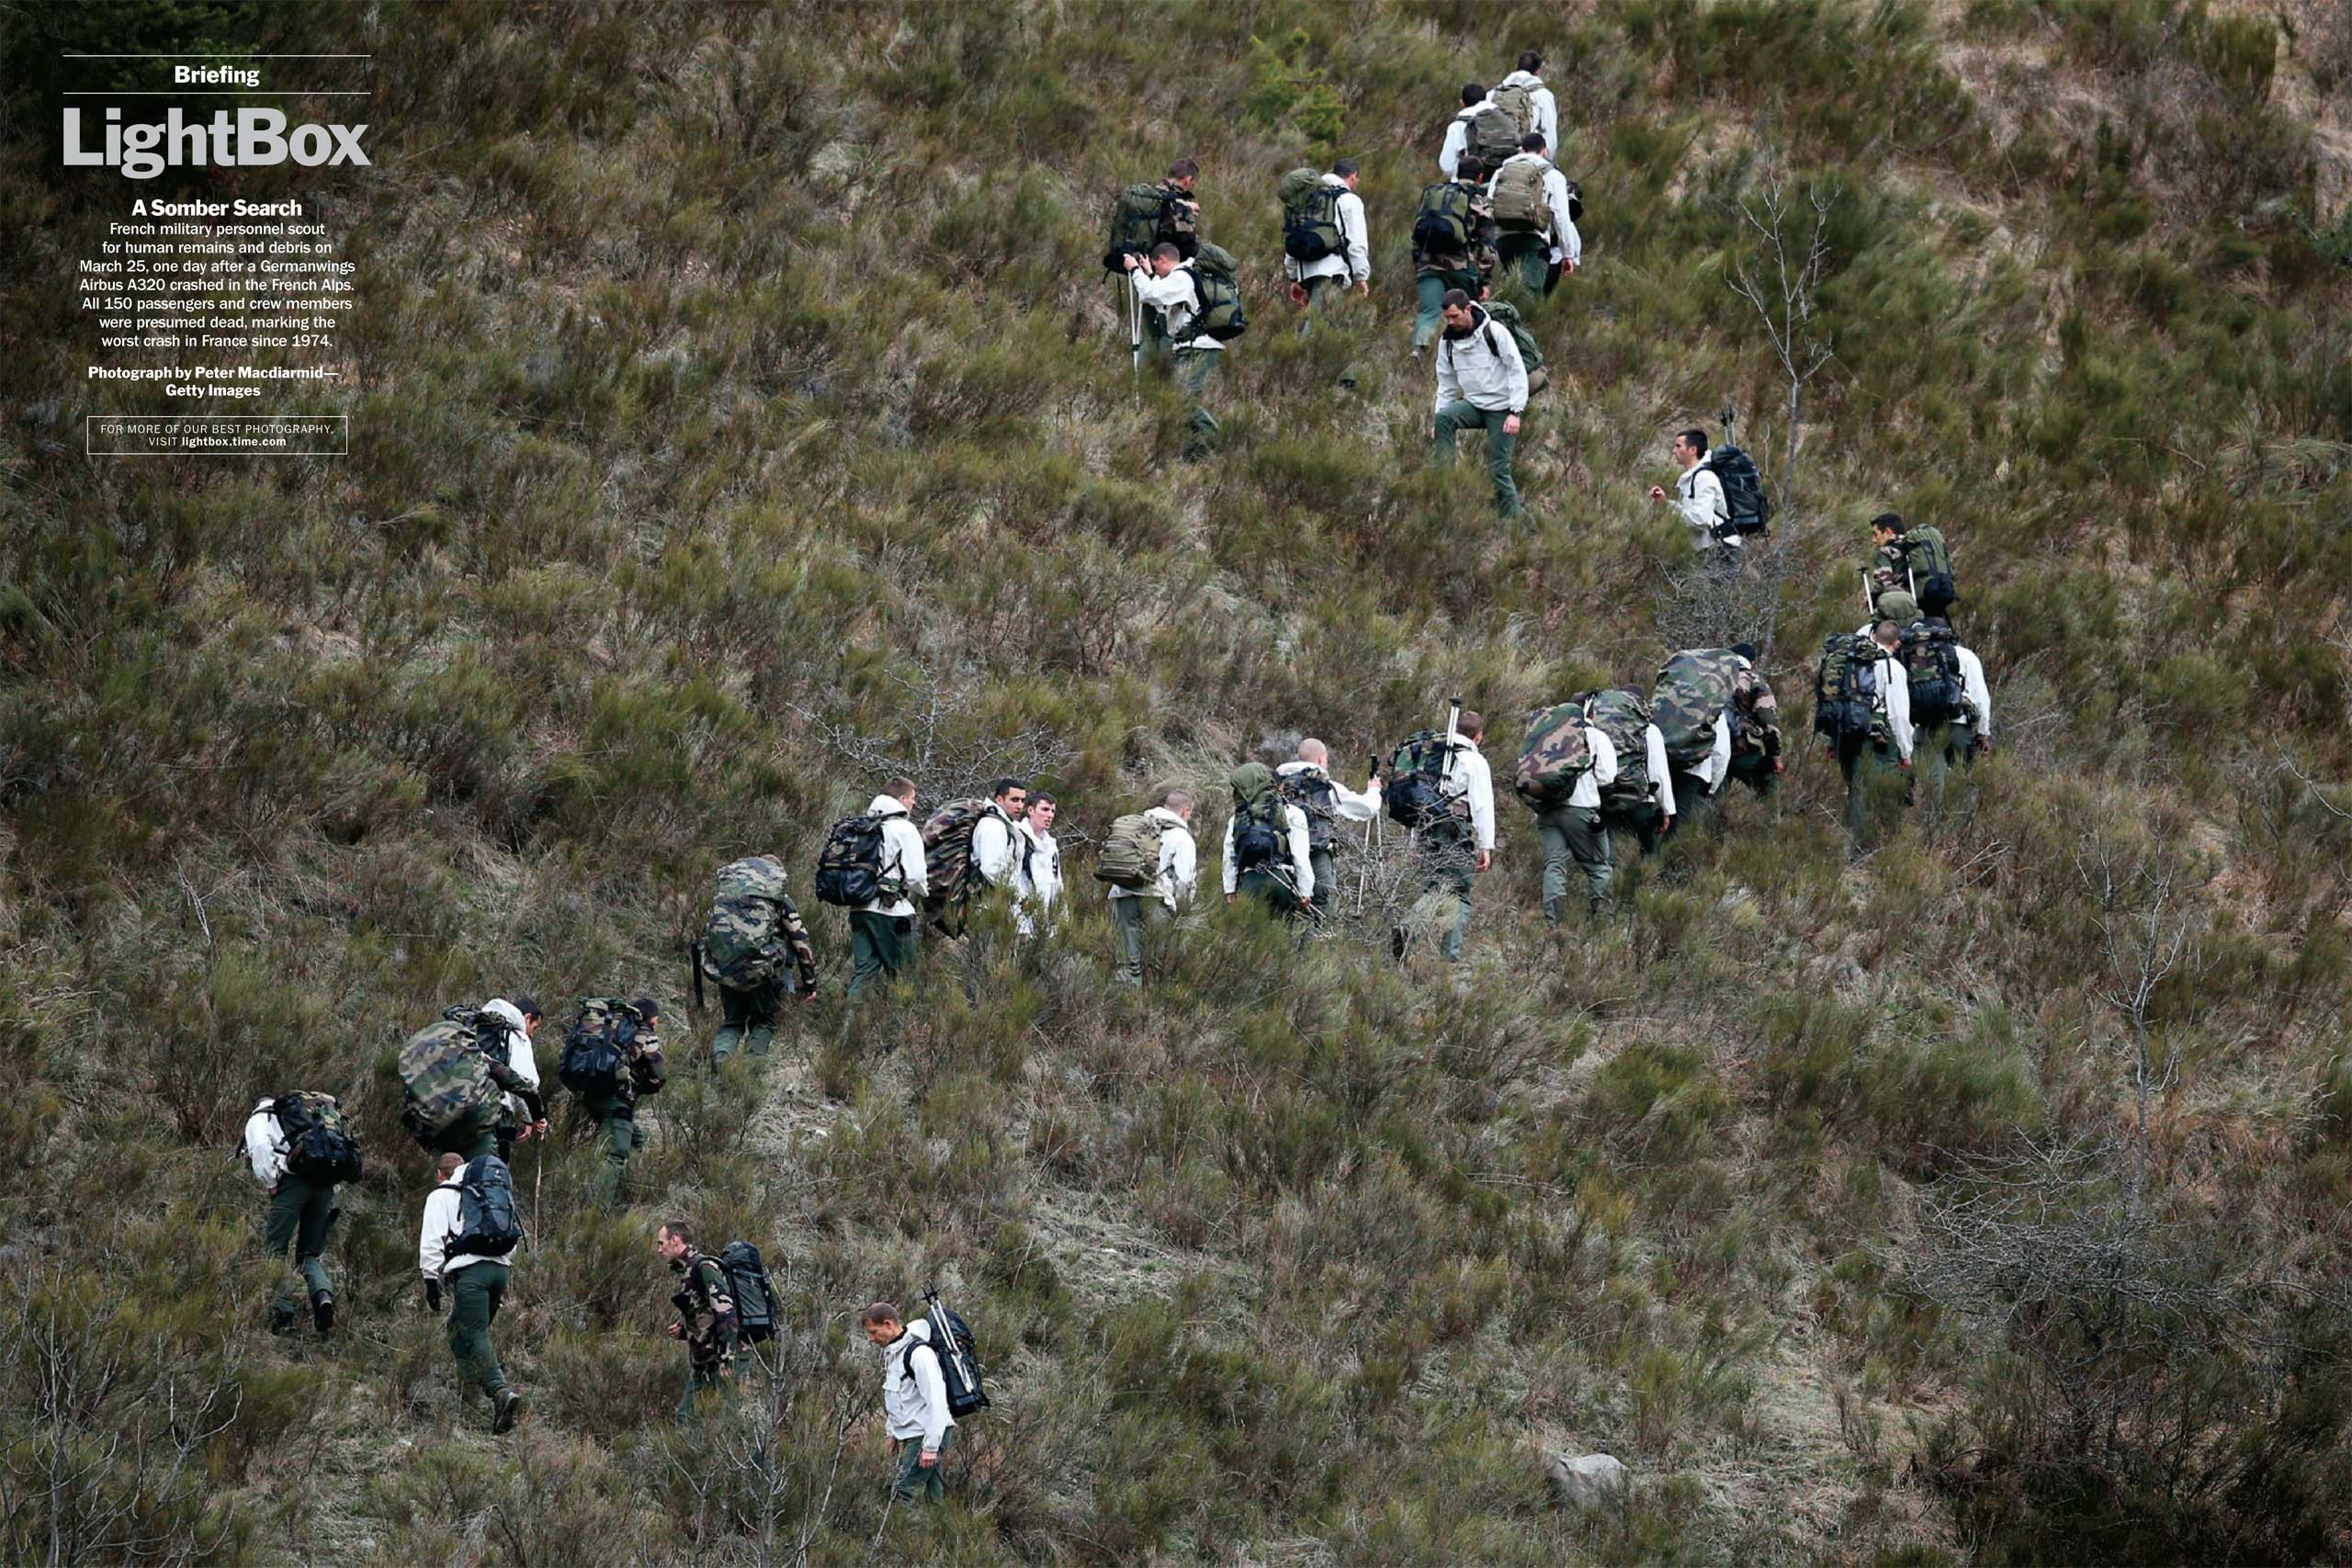 Photograph by Peter Macdiarmid—Getty ImagesFrench military personnel scout for human remains and debris on March 25, one day after a Germanwings Airbus A320 crashed in the French Alps. All 150 passengers and crew members were presumed dead, marking the worst crash in France since 1974. (TIME issue April 6, 2015)